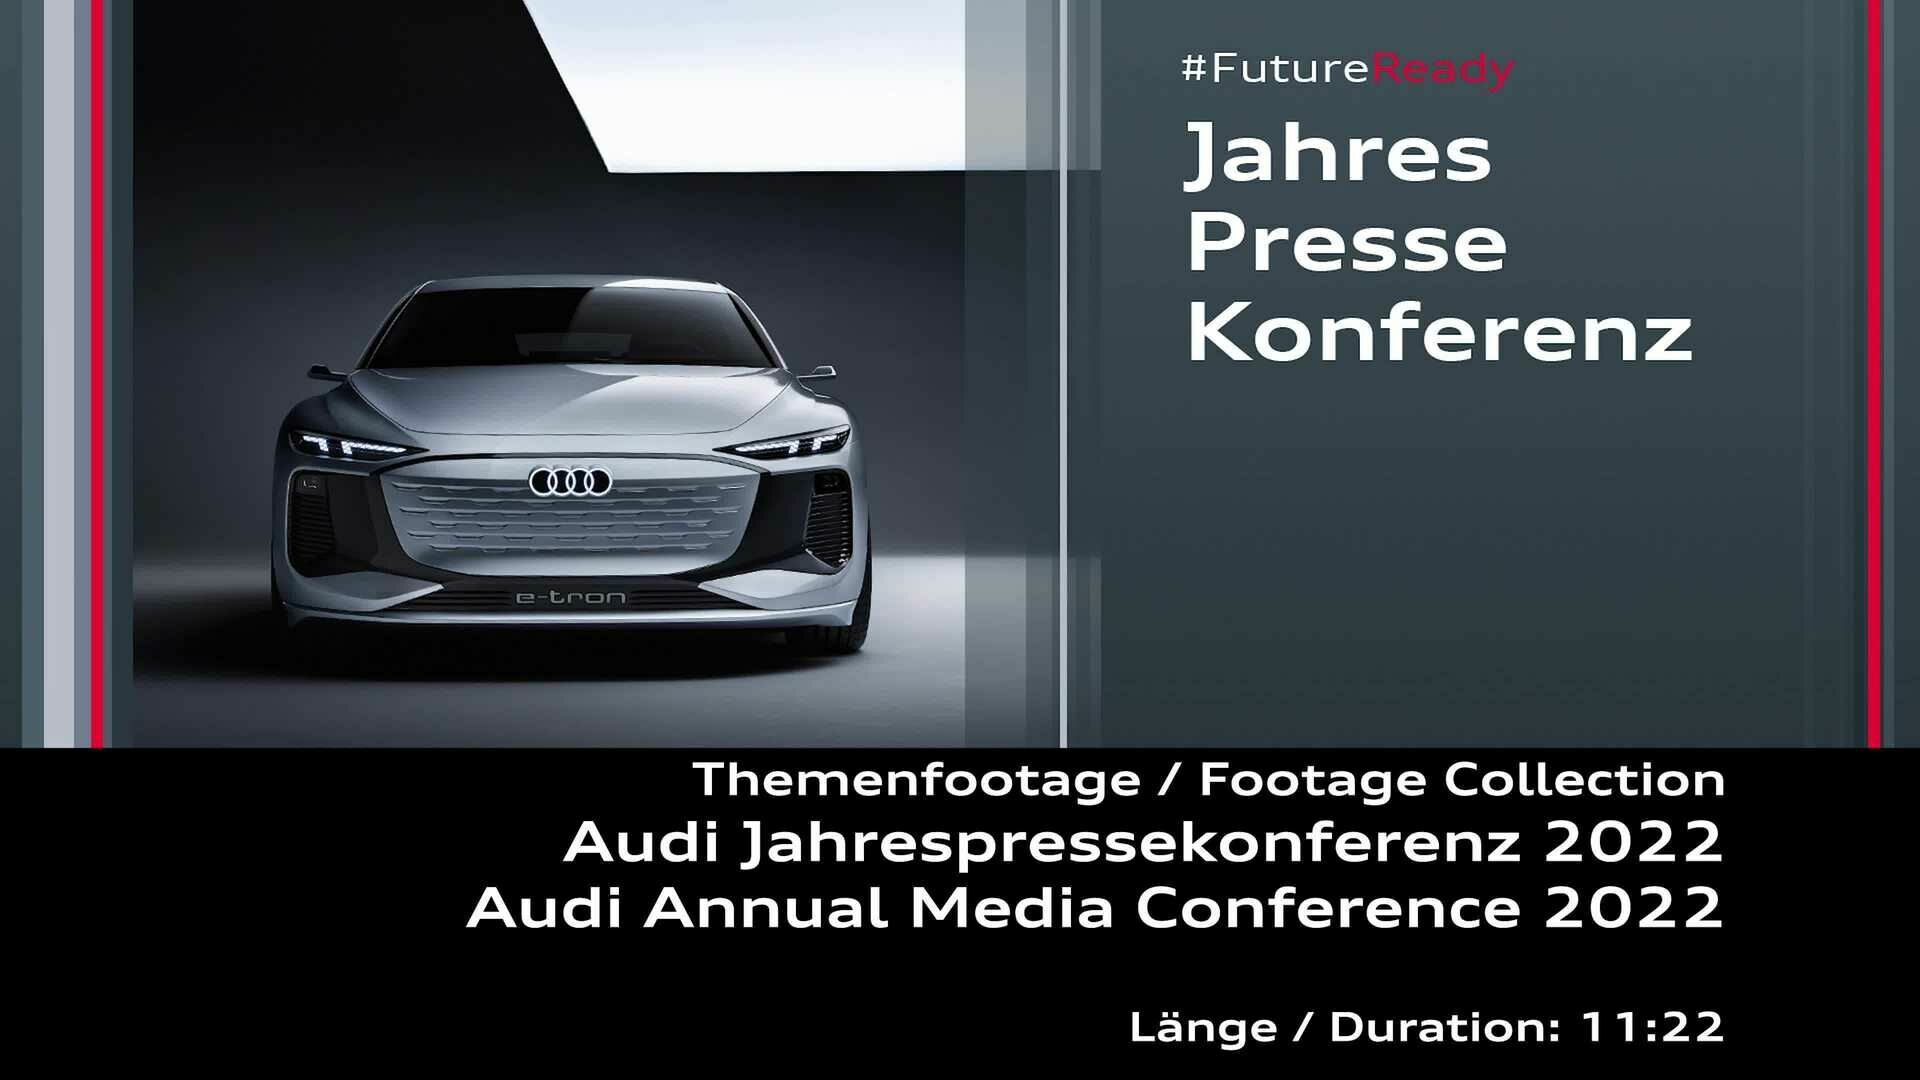 Footage: Pictures of the Audi Annual Media Conference 2022